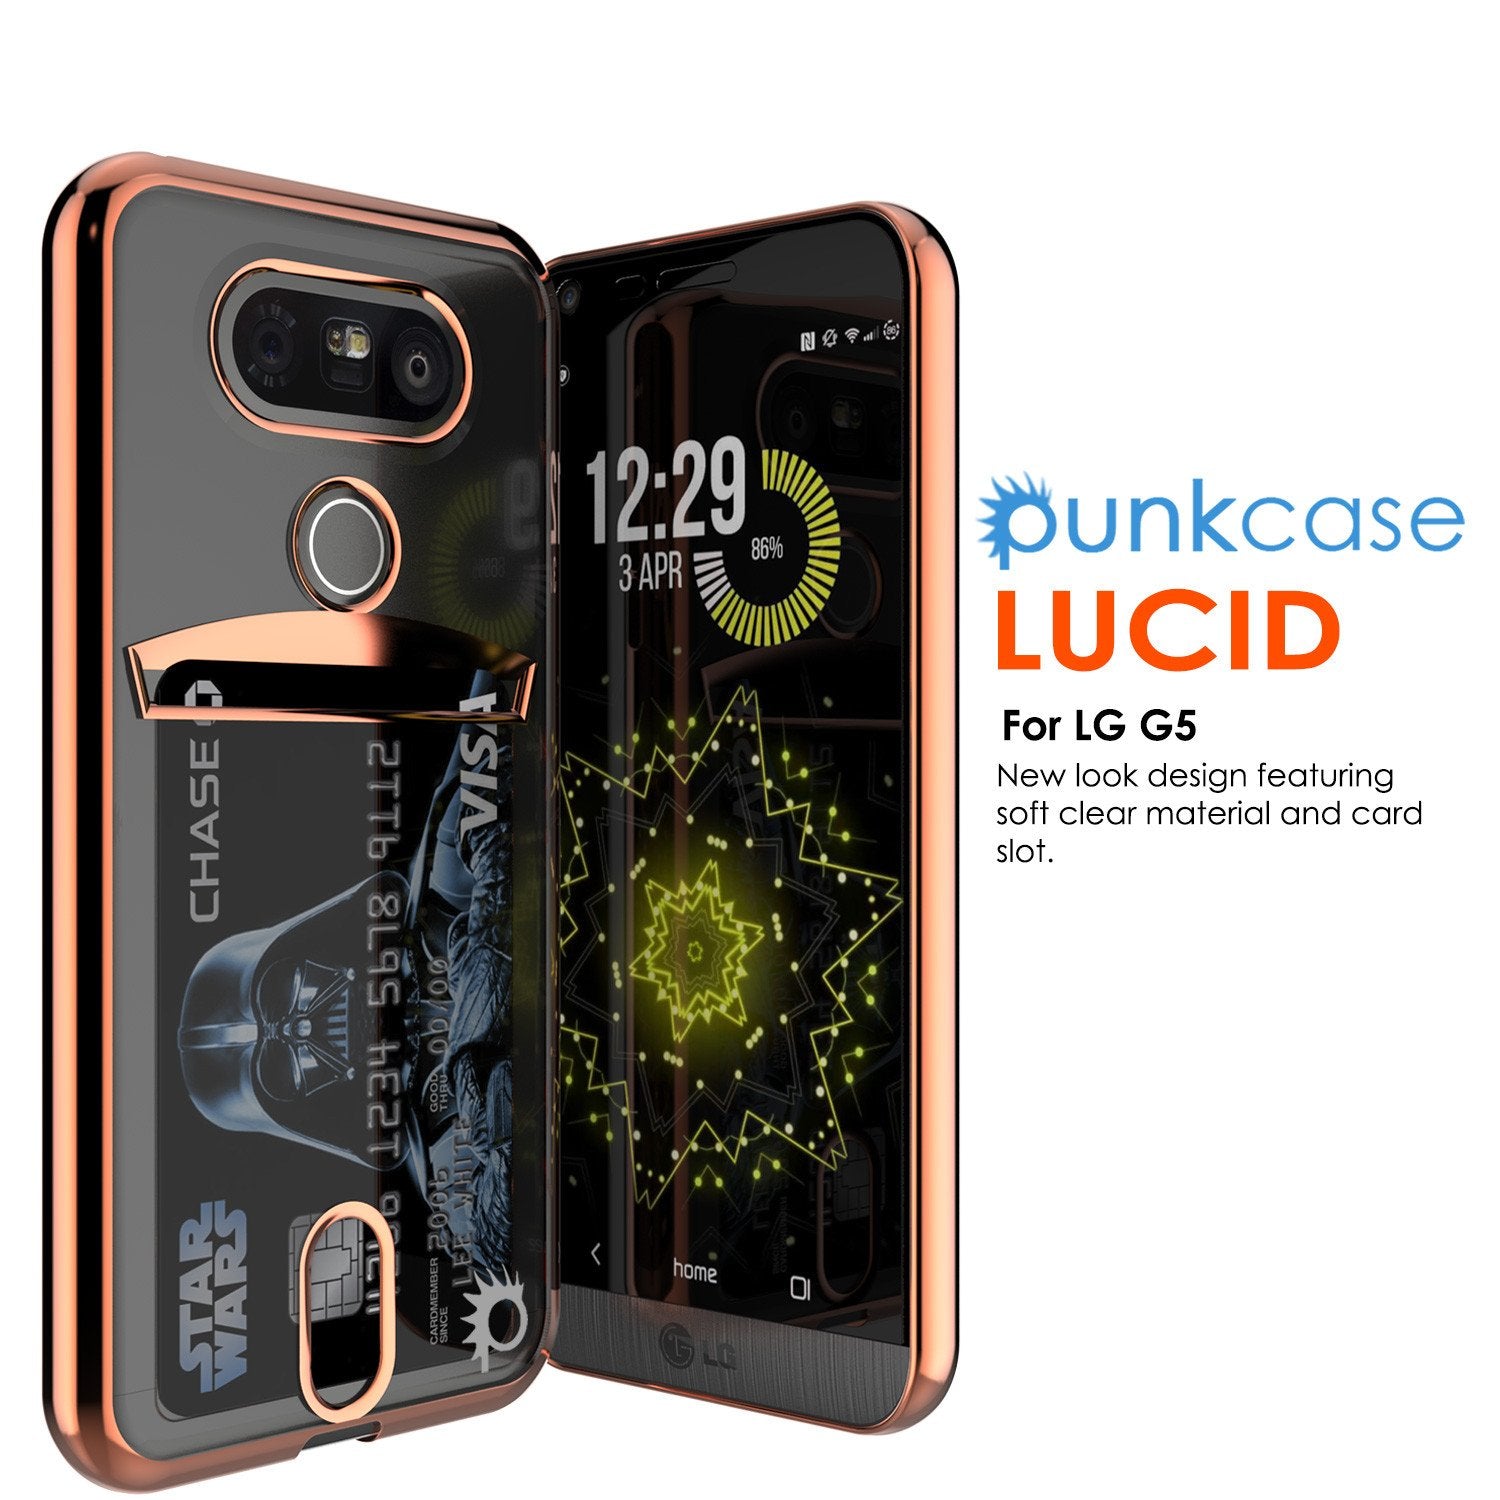 LG G5 Case, PUNKCASE® Rose Gold LUCID  Series | Card Slot | PUNK SHIELD Screen Protector - PunkCase NZ